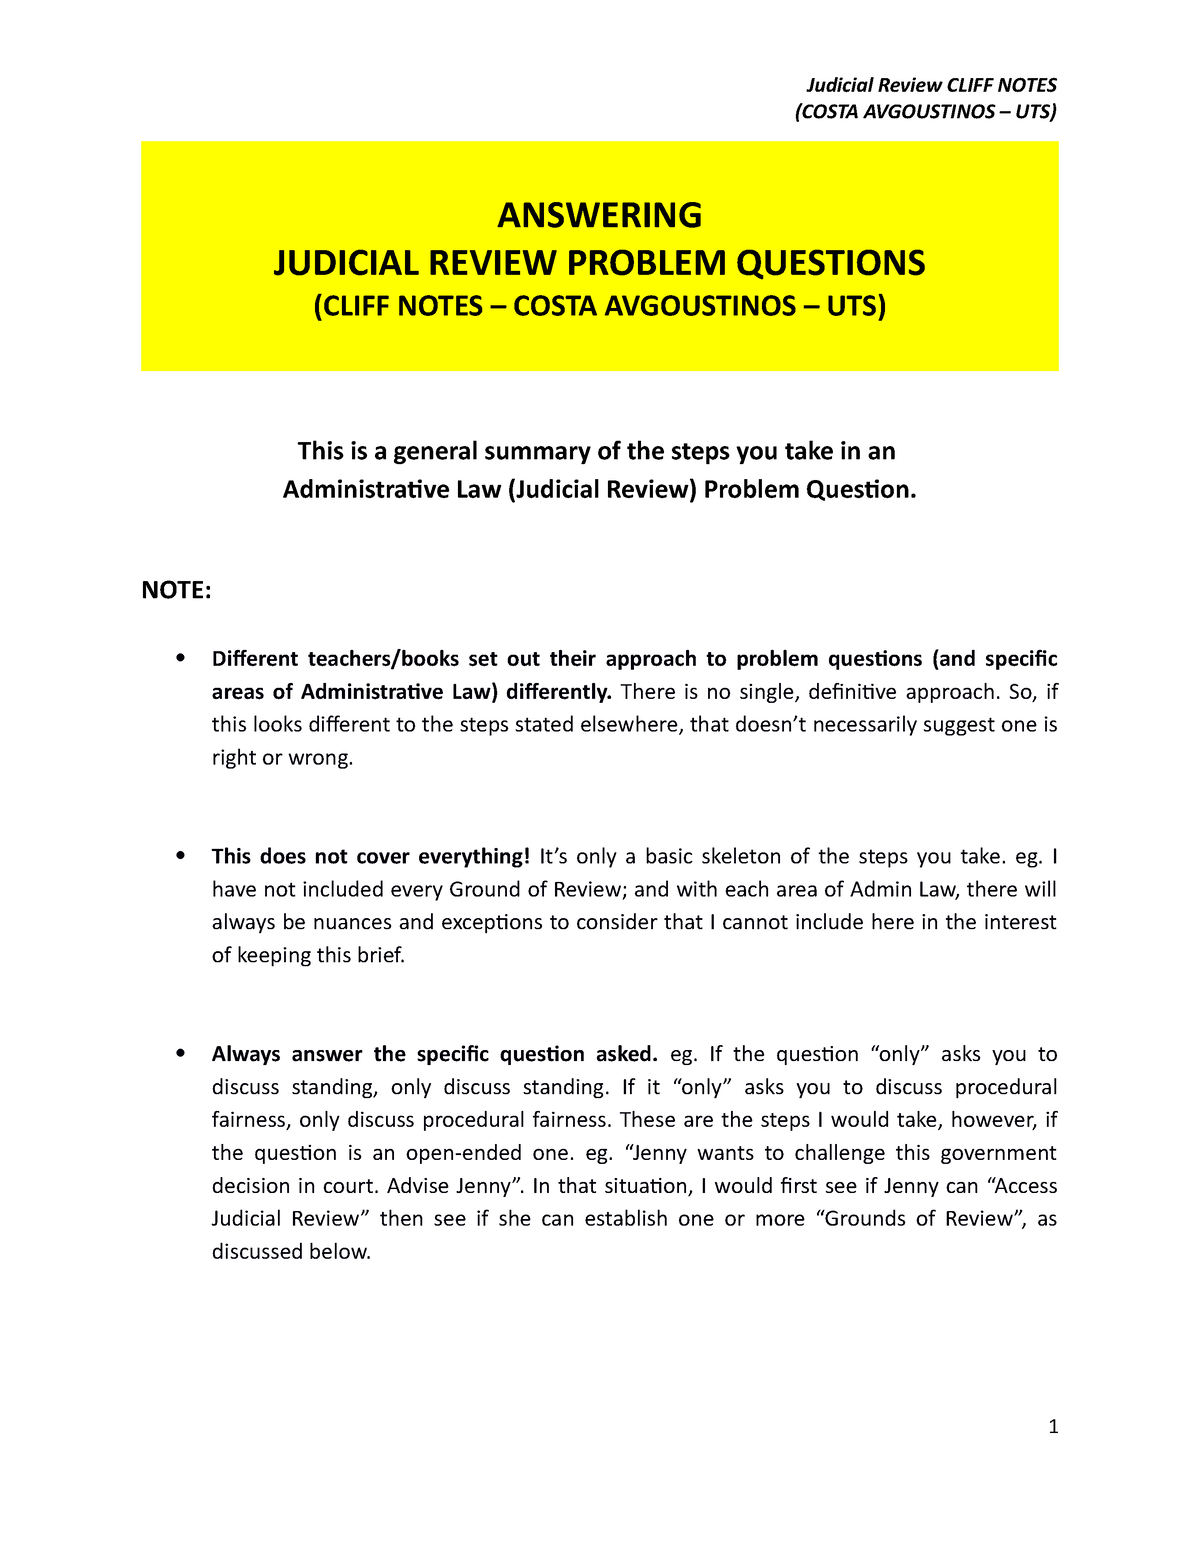 judicial-review-answer-list-notes-costa-avgoustinos-uts